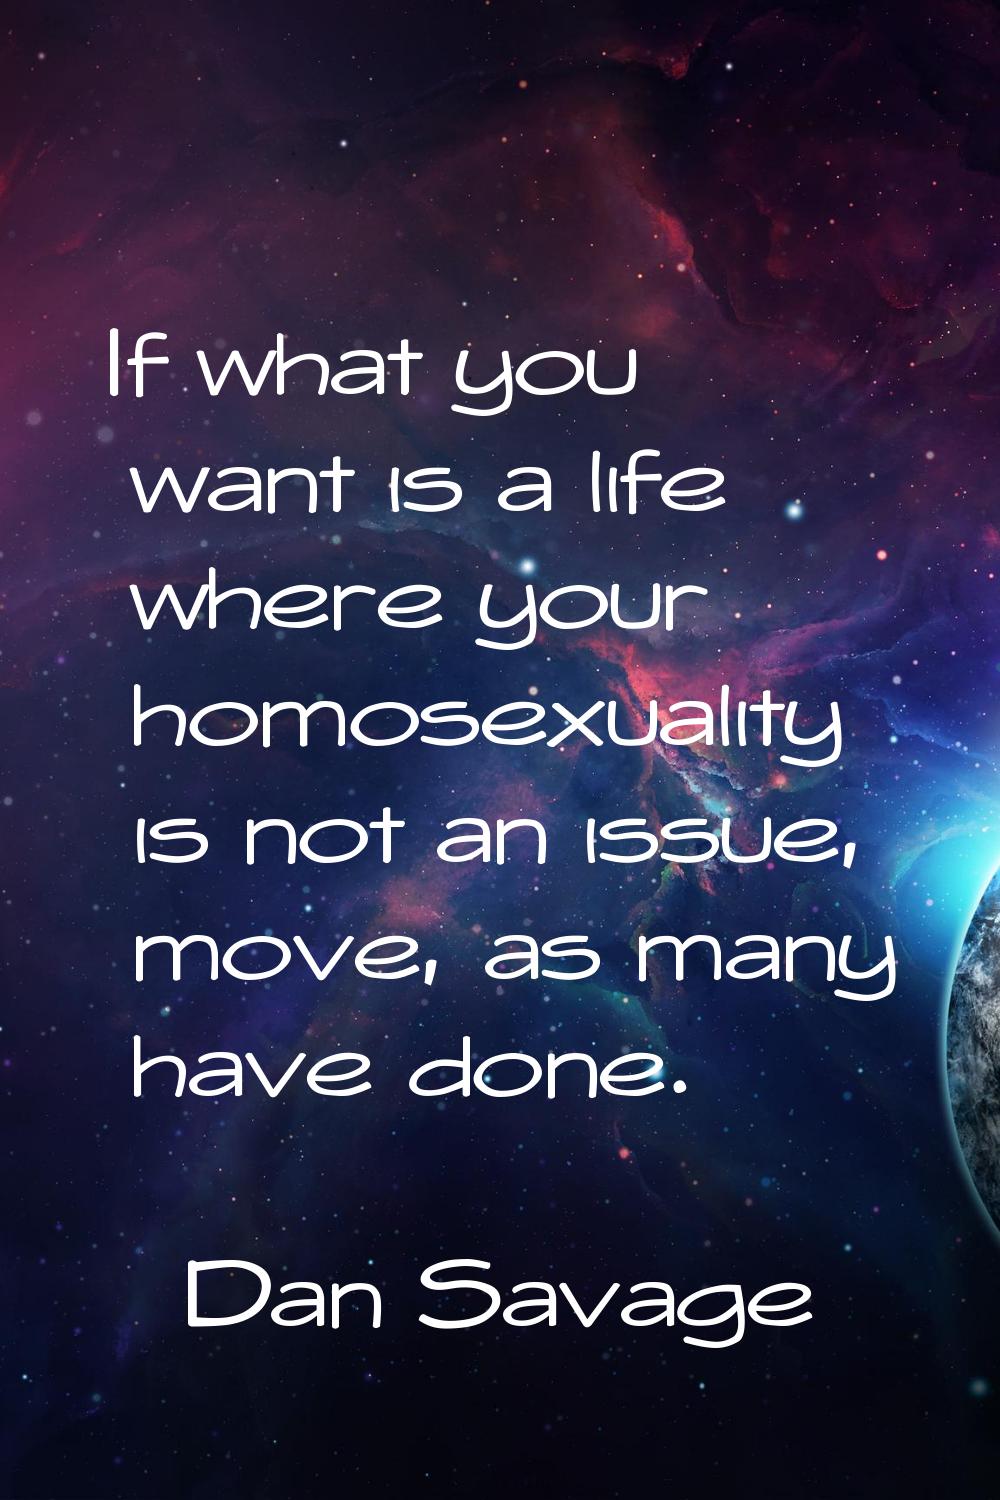 If what you want is a life where your homosexuality is not an issue, move, as many have done.